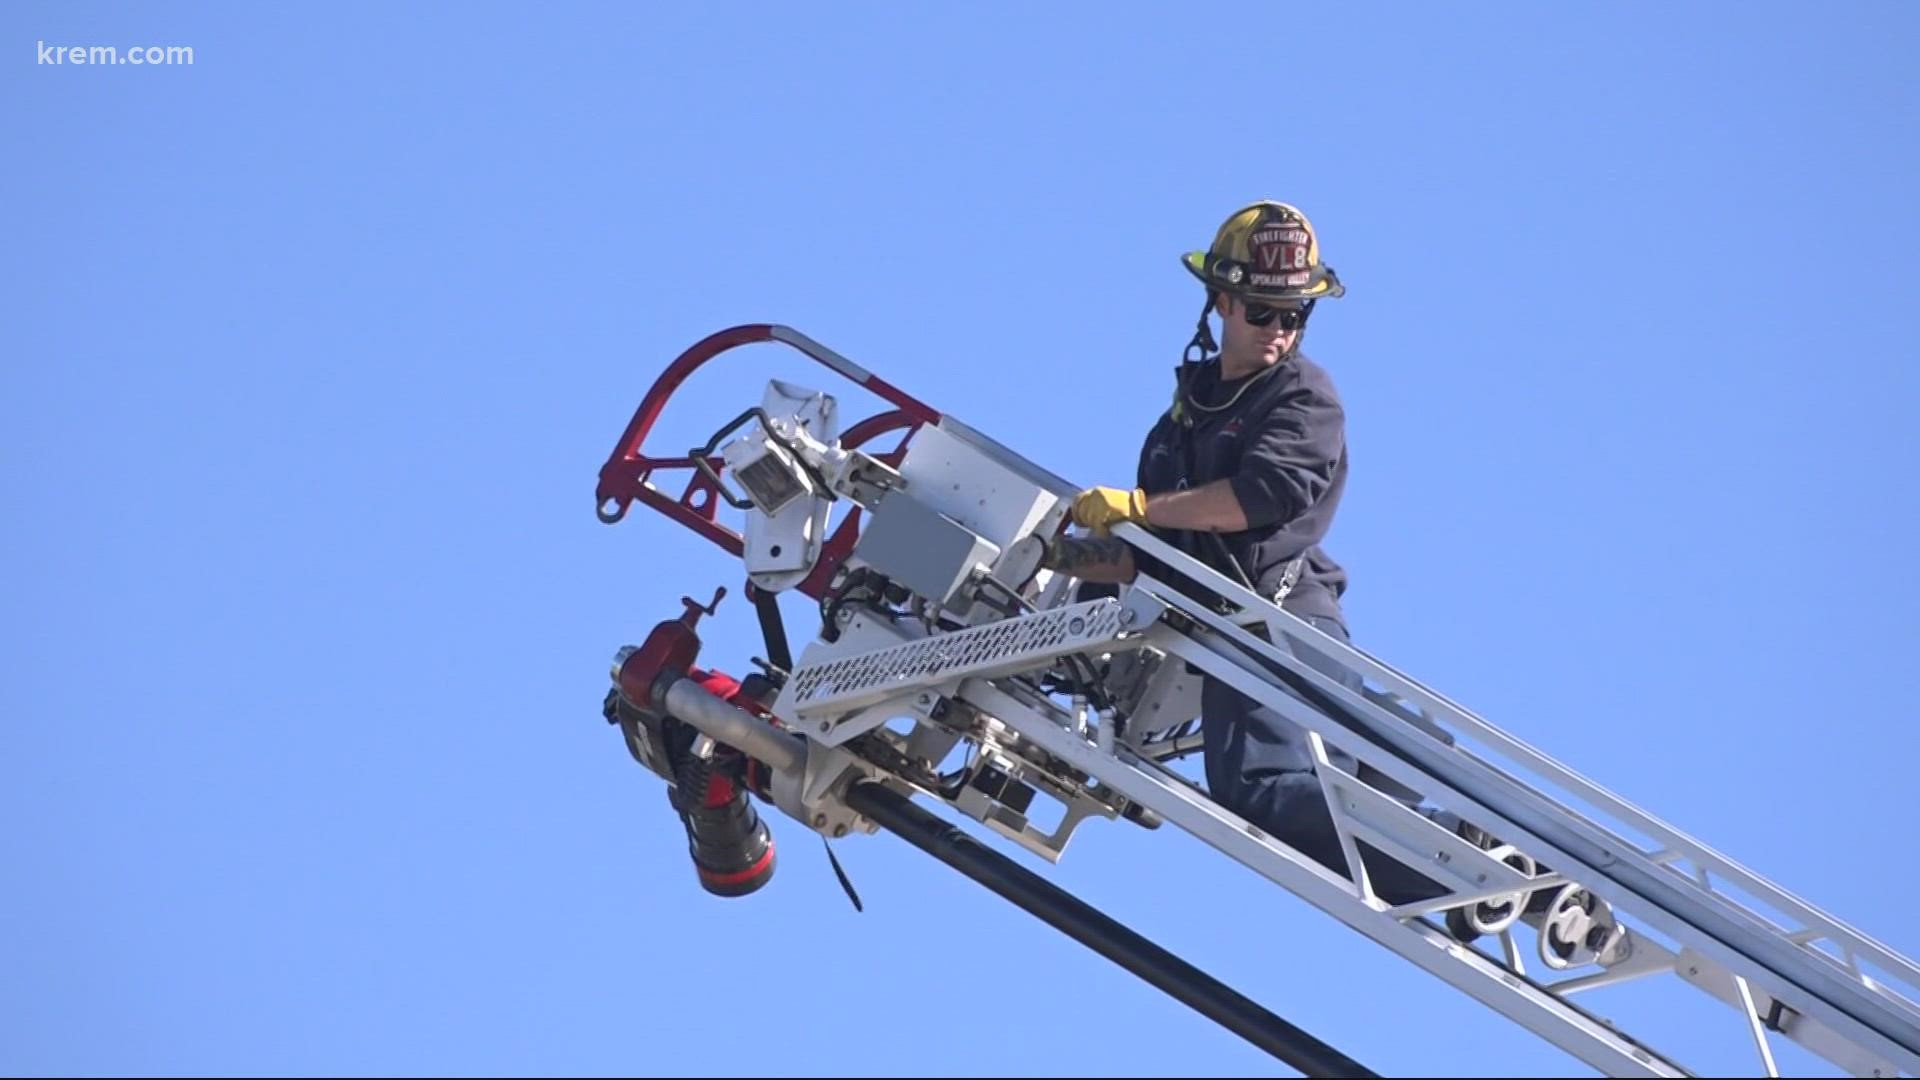 Other local fire departments are expecting to lose dozens of firefighters from the mandate.